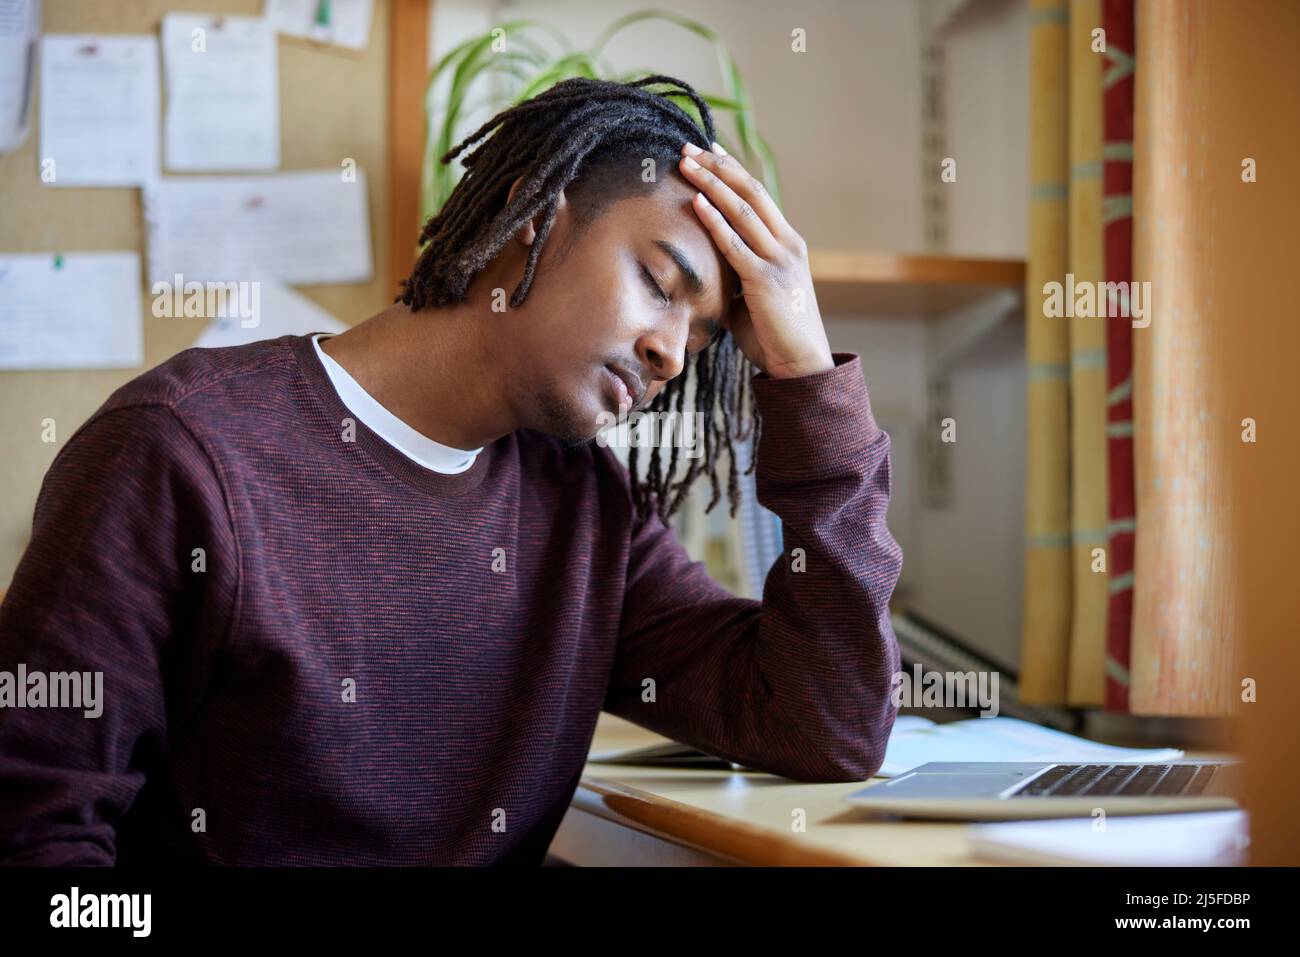 Stressed Male University Or College Student With Poor Mental Health Studying With Laptop At Desk In Room Stock Photo